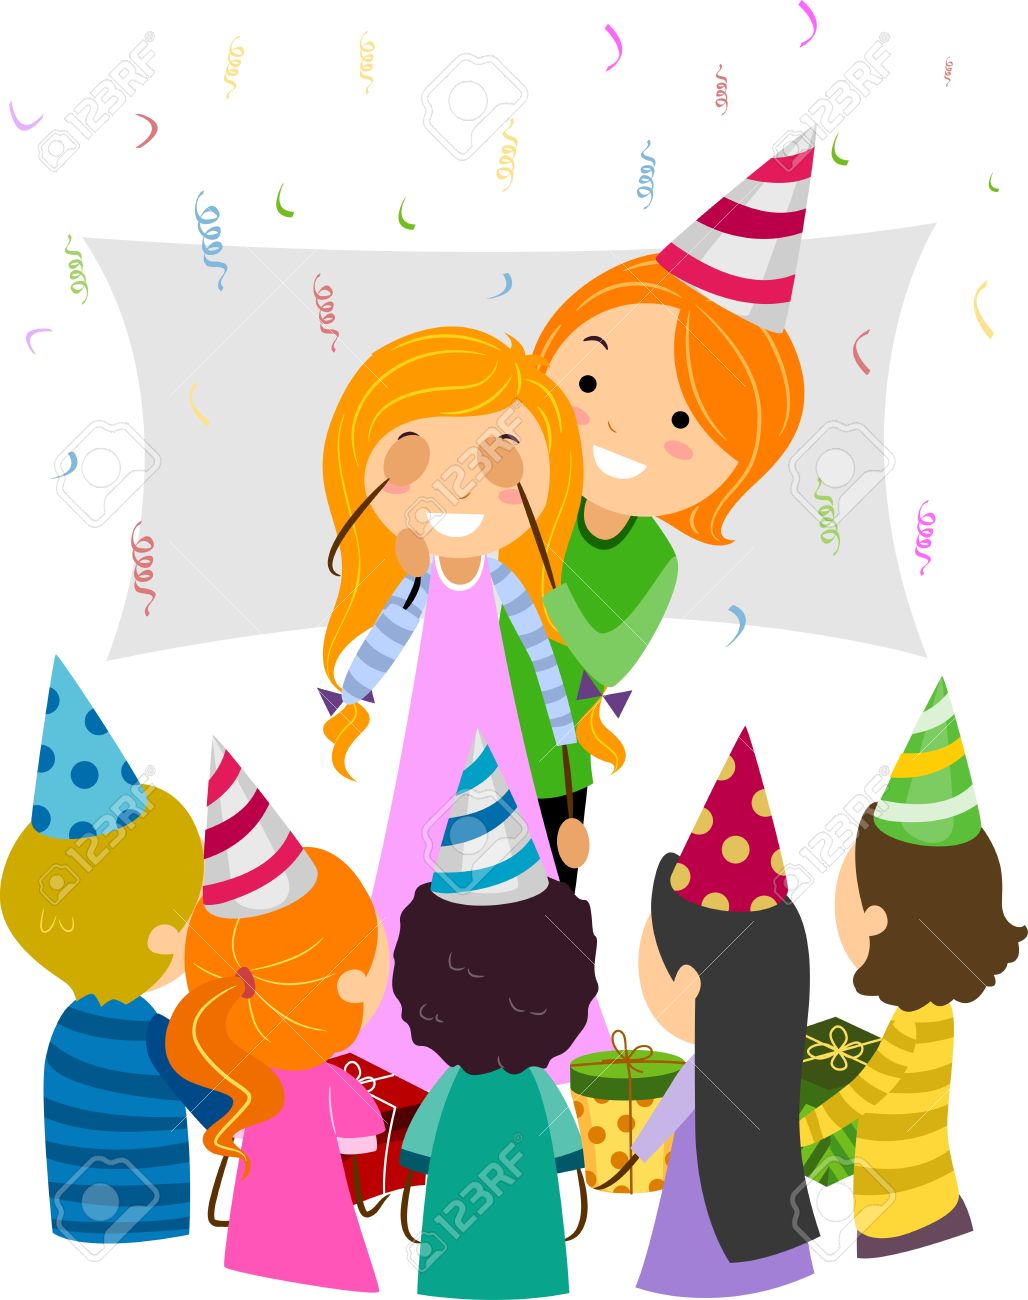 Surprise birthday party clipart